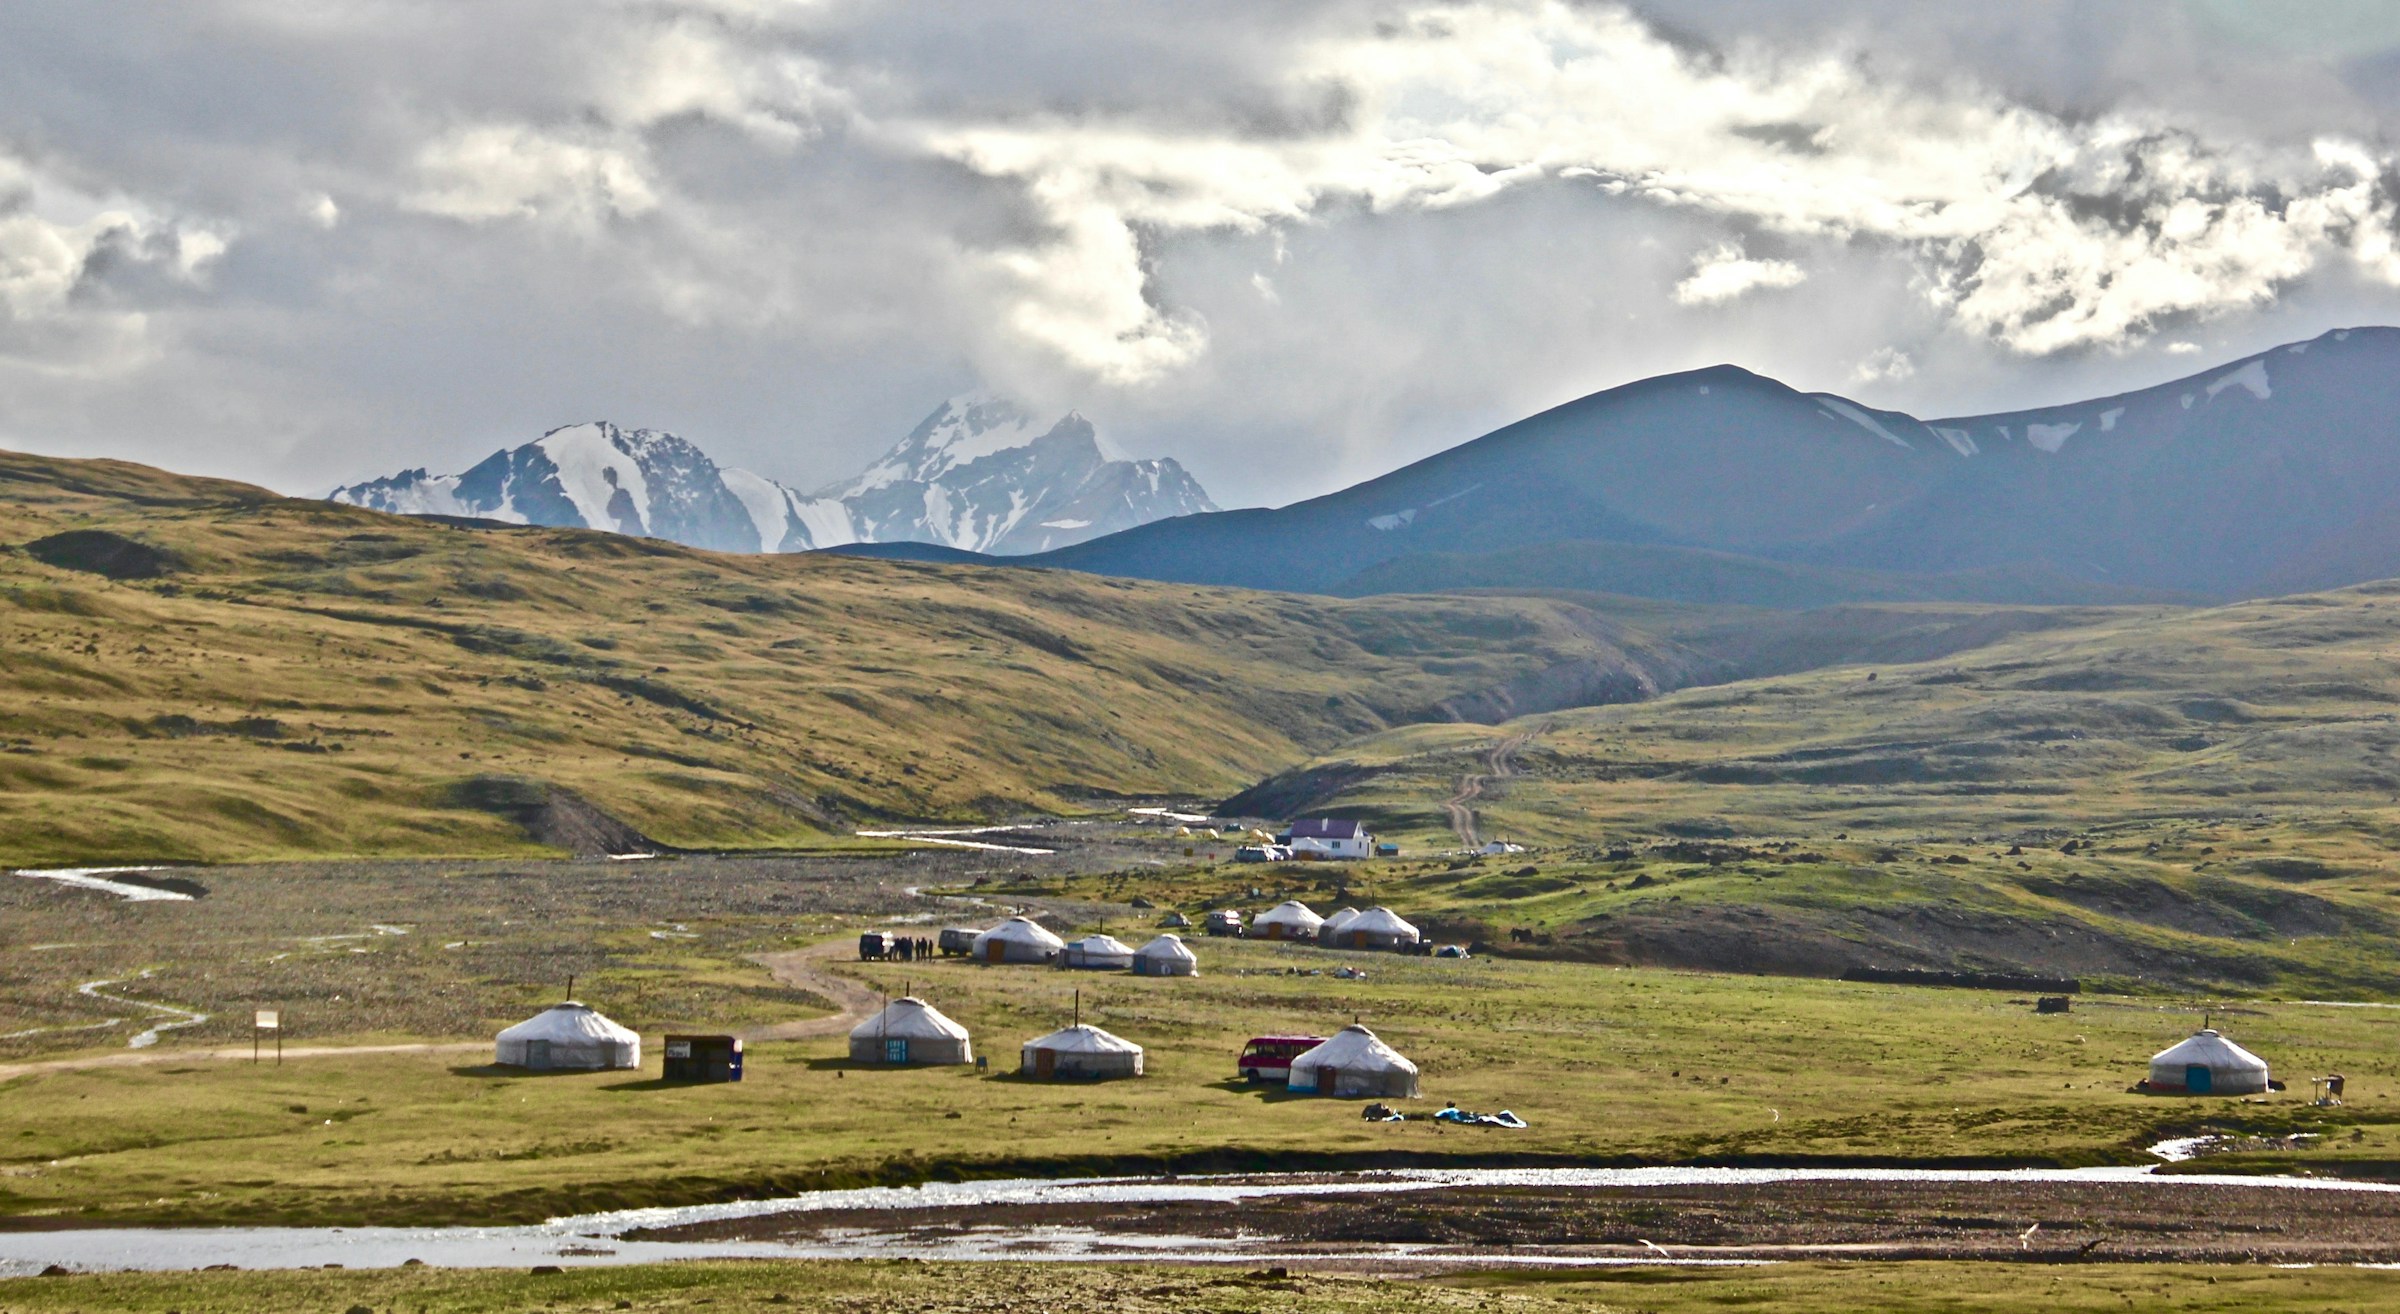 Mongolia Signs Ambitious Conservation Agreement with The Nature Conservancy to Protect 75% of Land